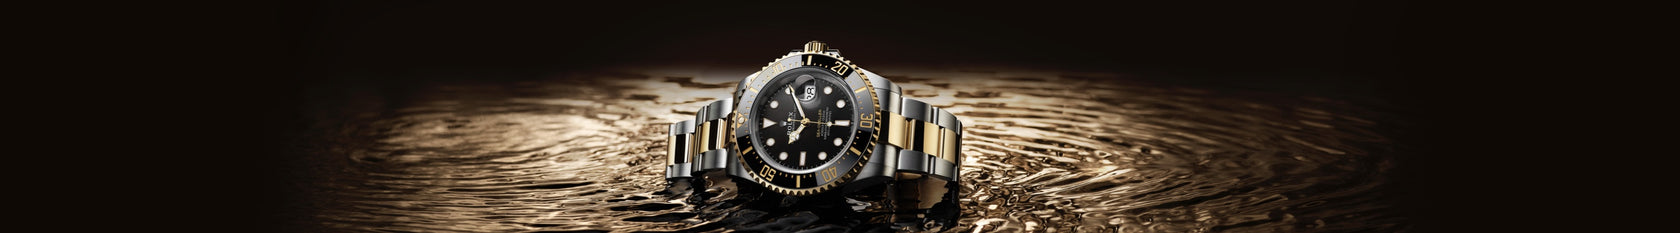 The Rolex Sea-Dweller in 18K yellow gold and Oystersteel lying in water with a golden hue. Model #126603.